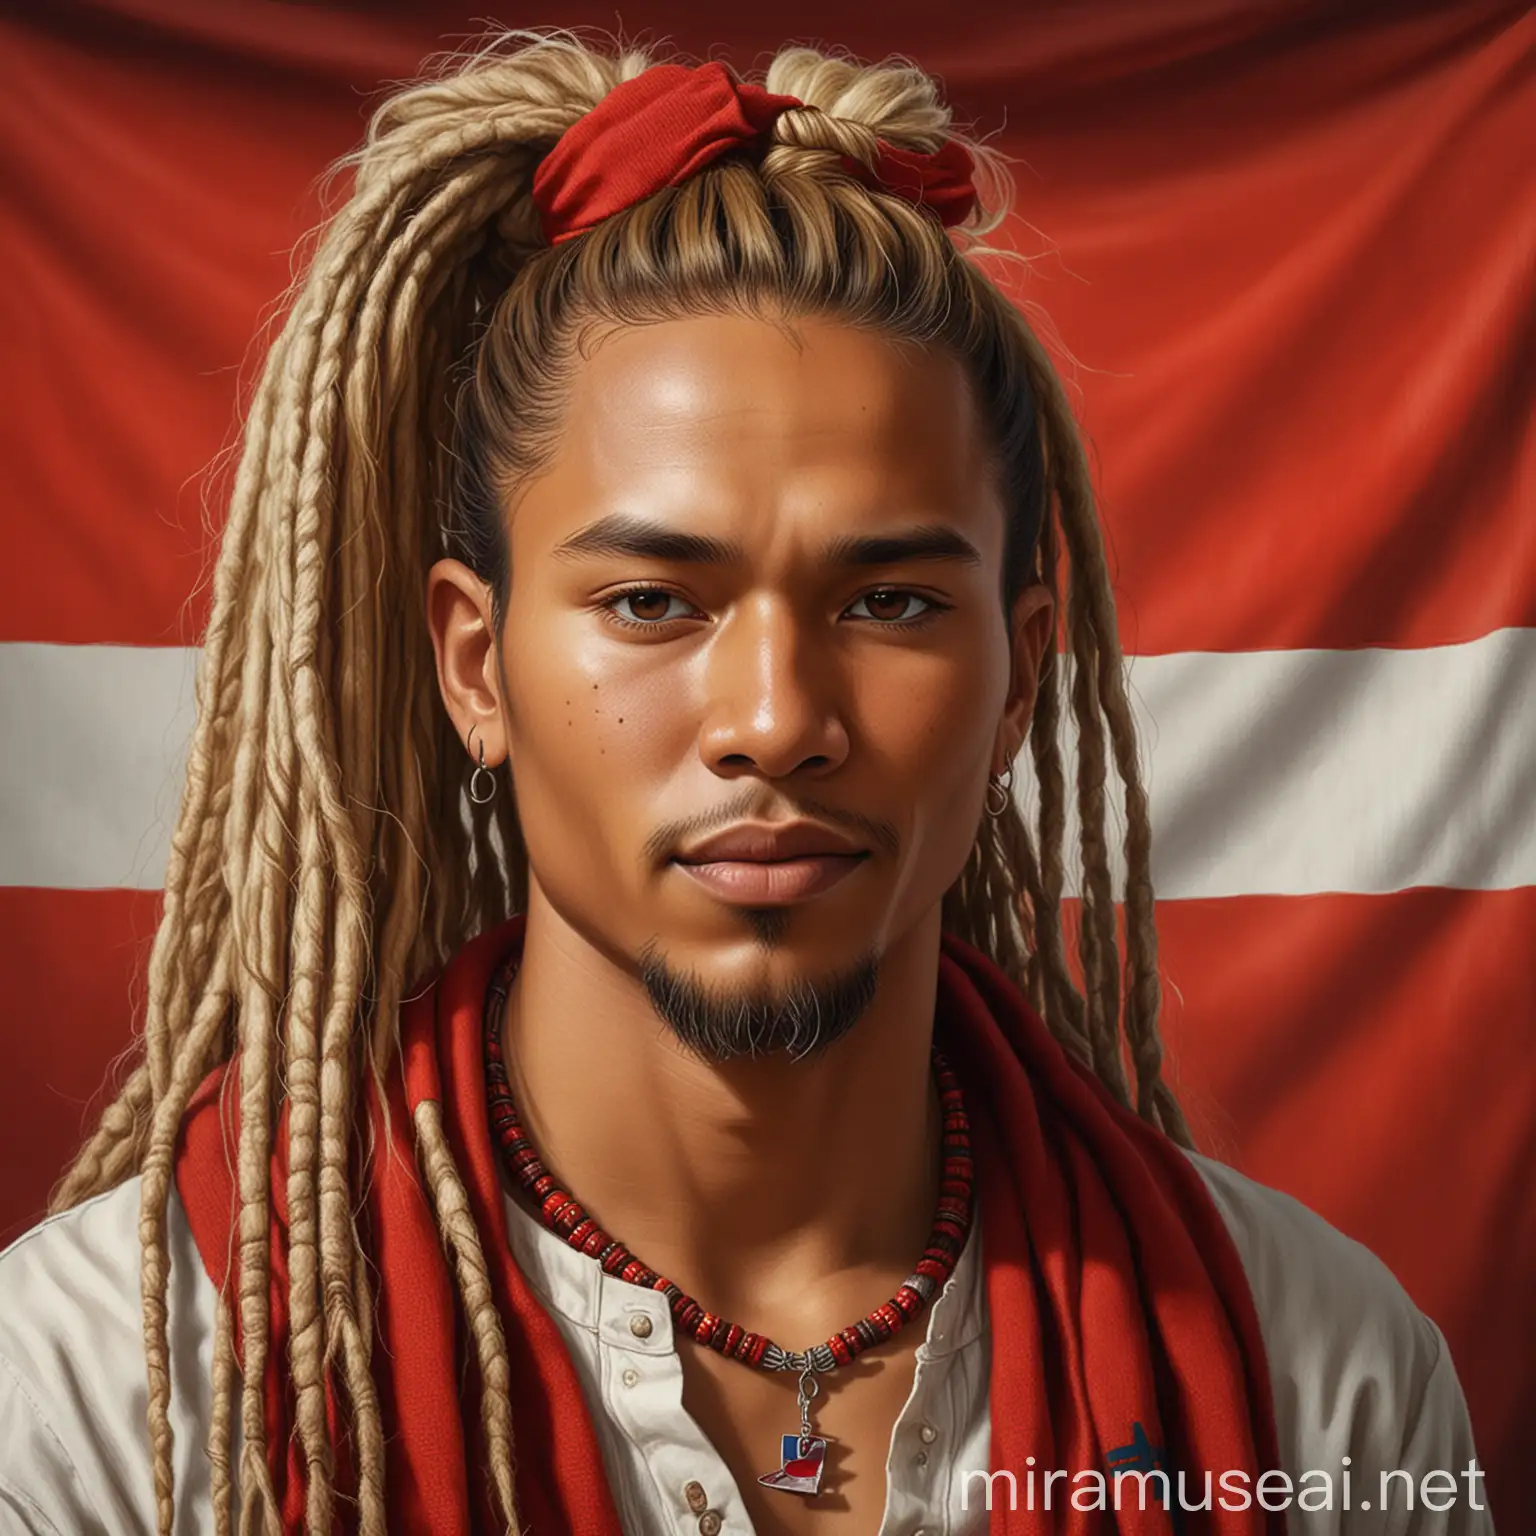 Handsome Indonesian Man with Blonde Dreadlocks in Red Knitwear and Necklace Portrait